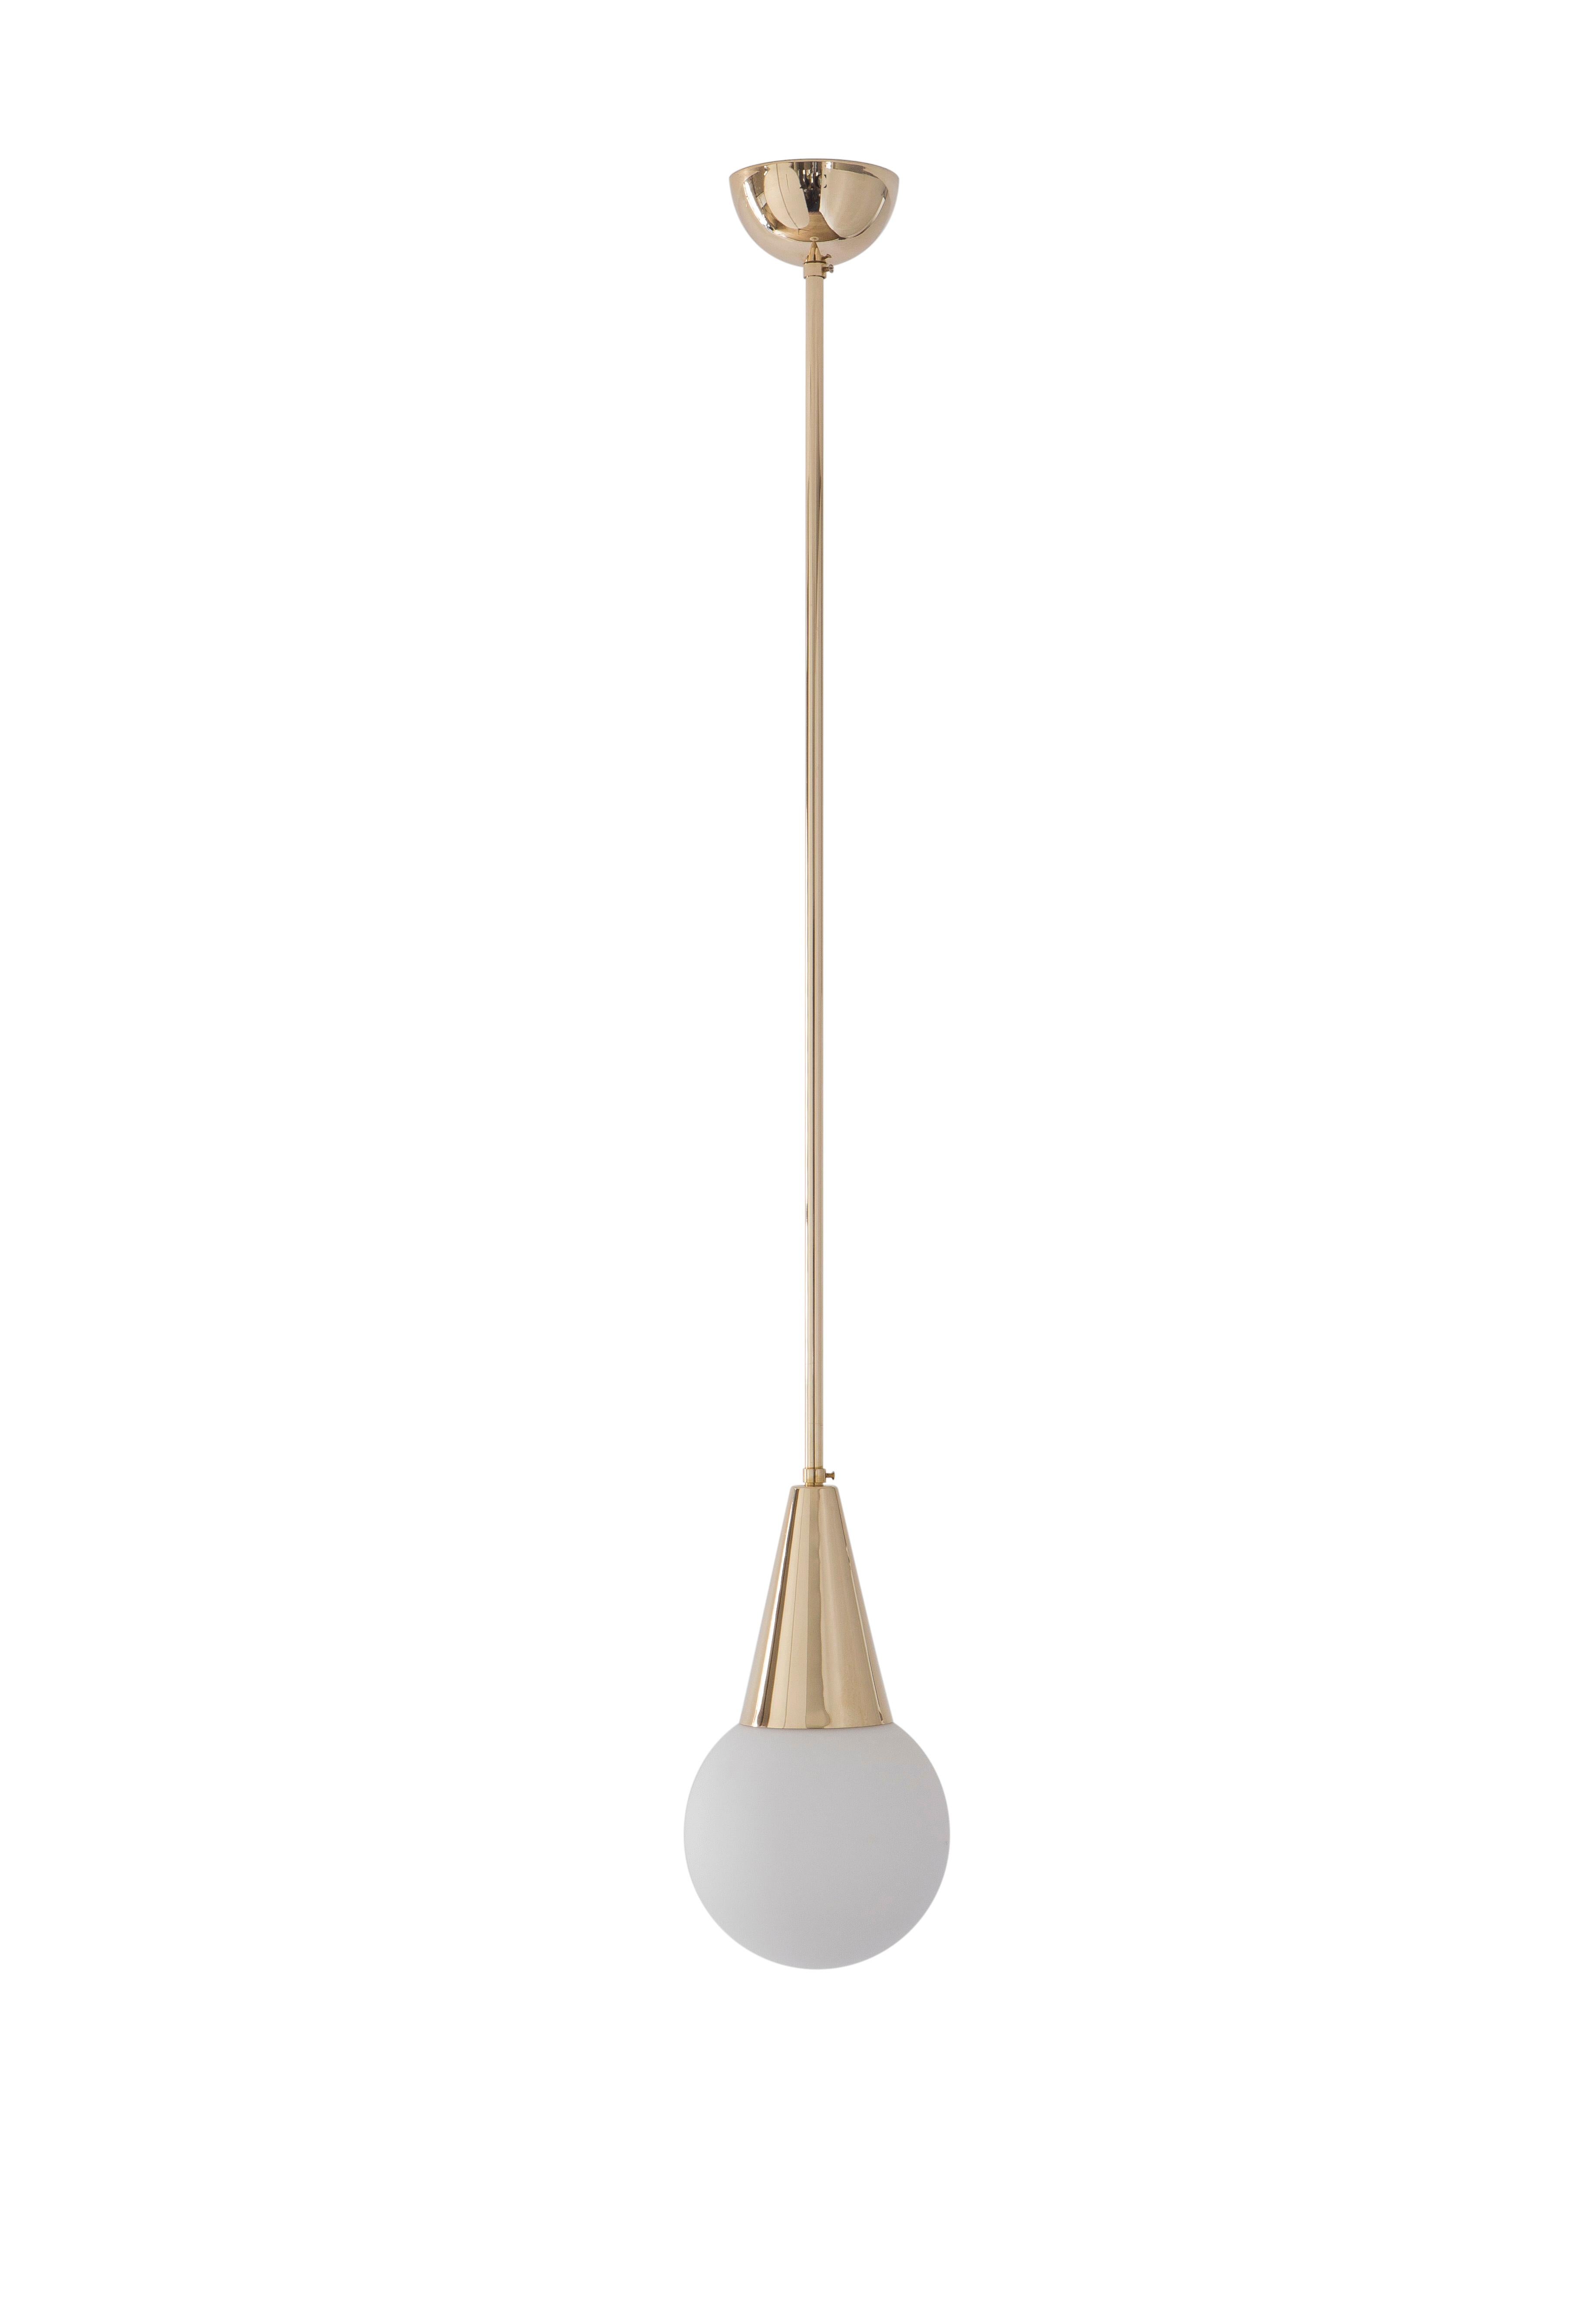 Pendant 05 by Magic Circus Editions
Dimensions: D 25 x W 25 x H 110 cm, also available in H 130, 150, 175, 190 cm
Materials: Brass, mouth blown glass

All our lamps can be wired according to each country. If sold to the USA it will be wired for